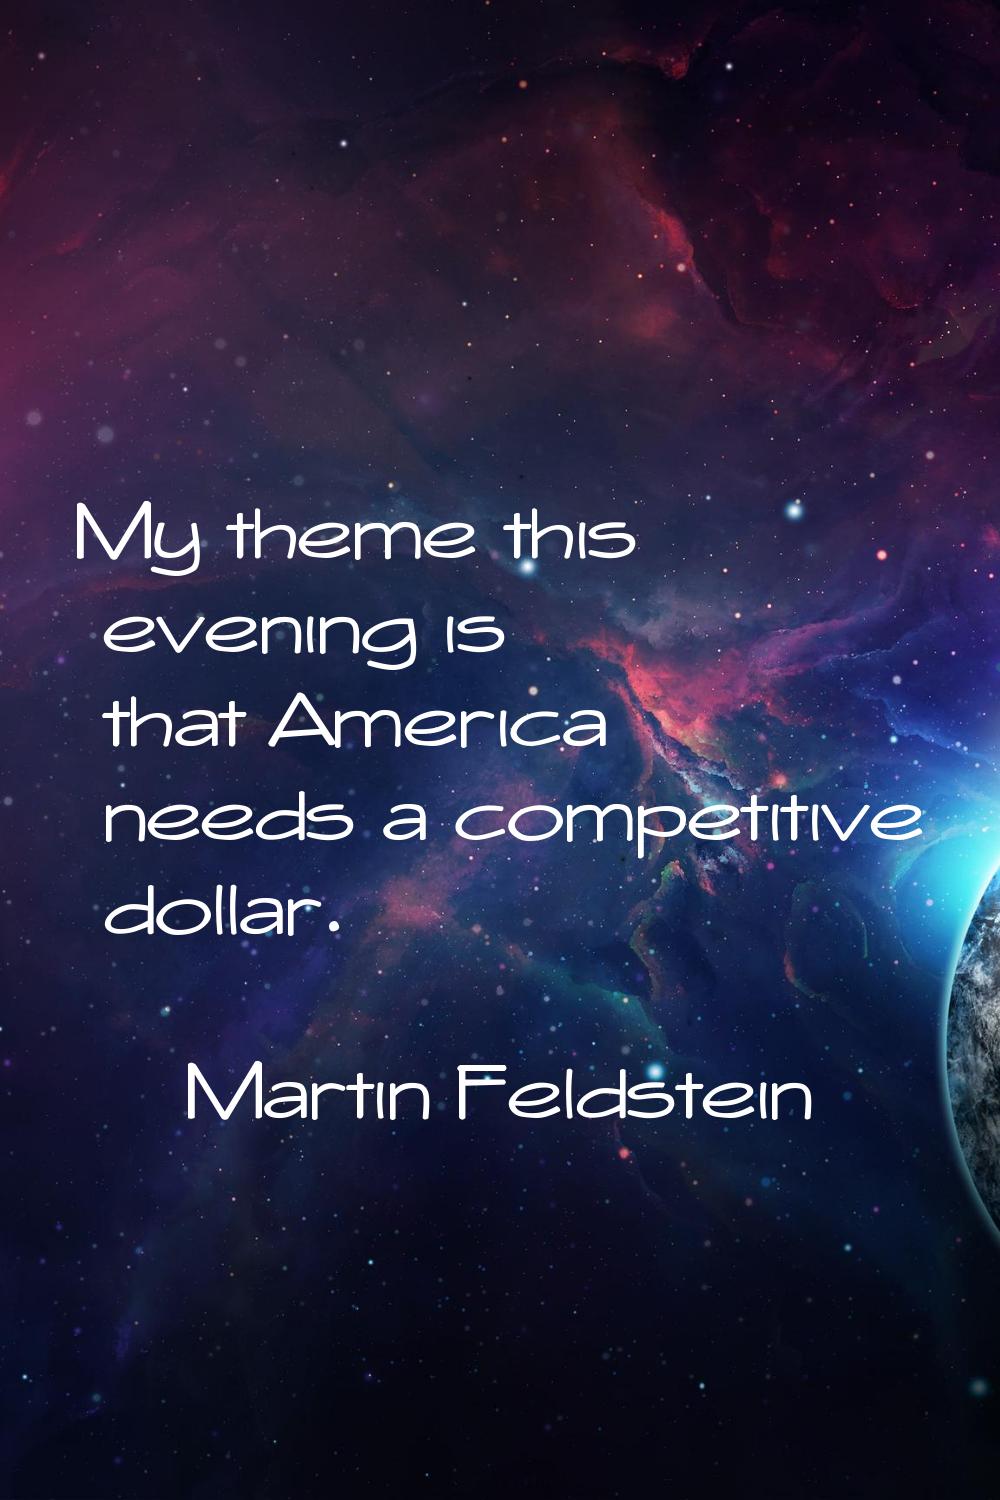 My theme this evening is that America needs a competitive dollar.